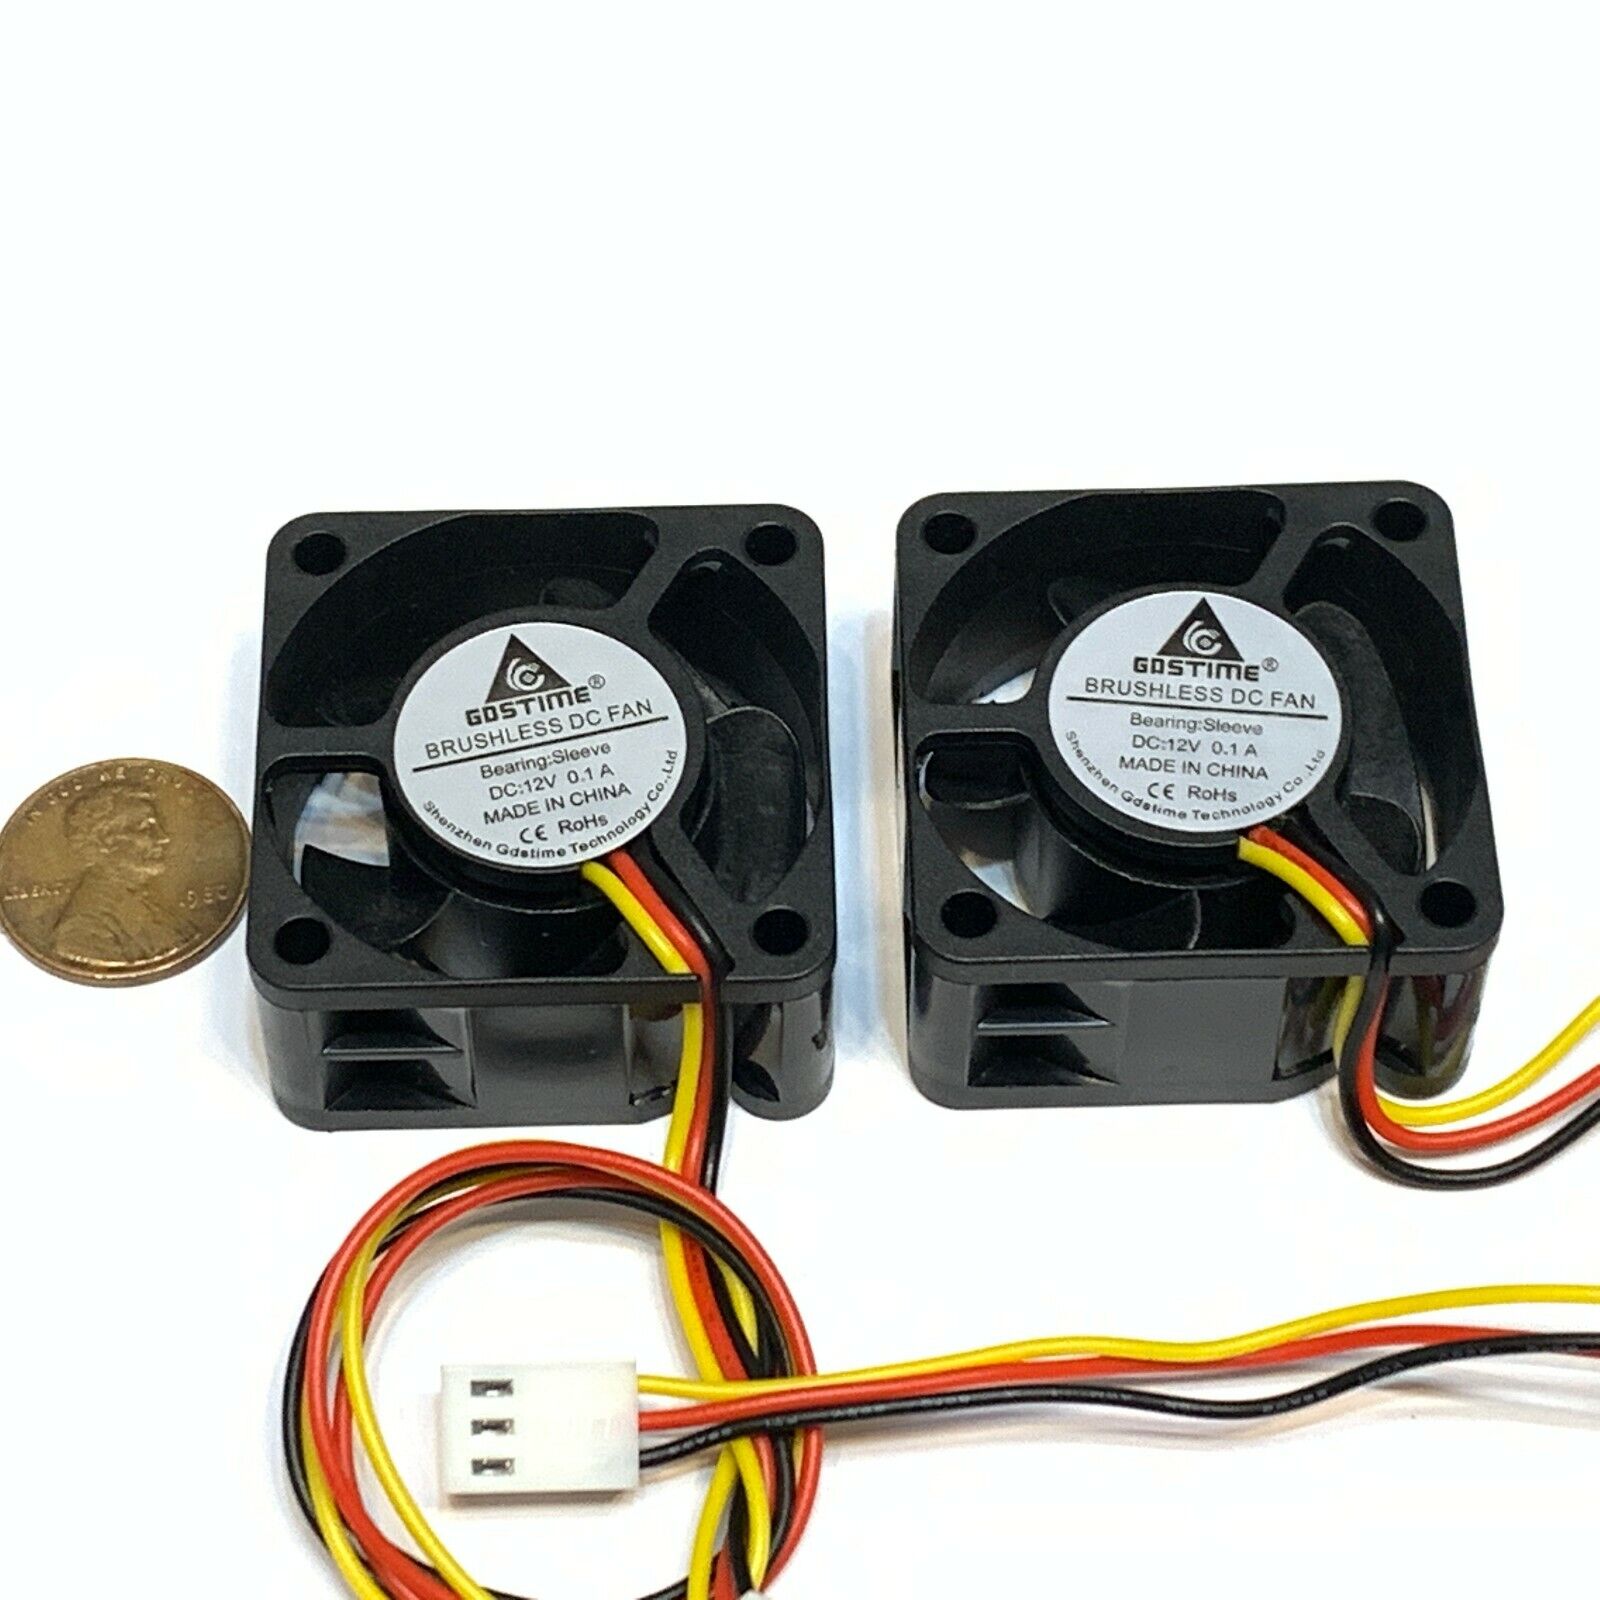 2 Pieces Fan 12v GDStime 40mm x 20mm 3pin 4020 dc mini computer cooling